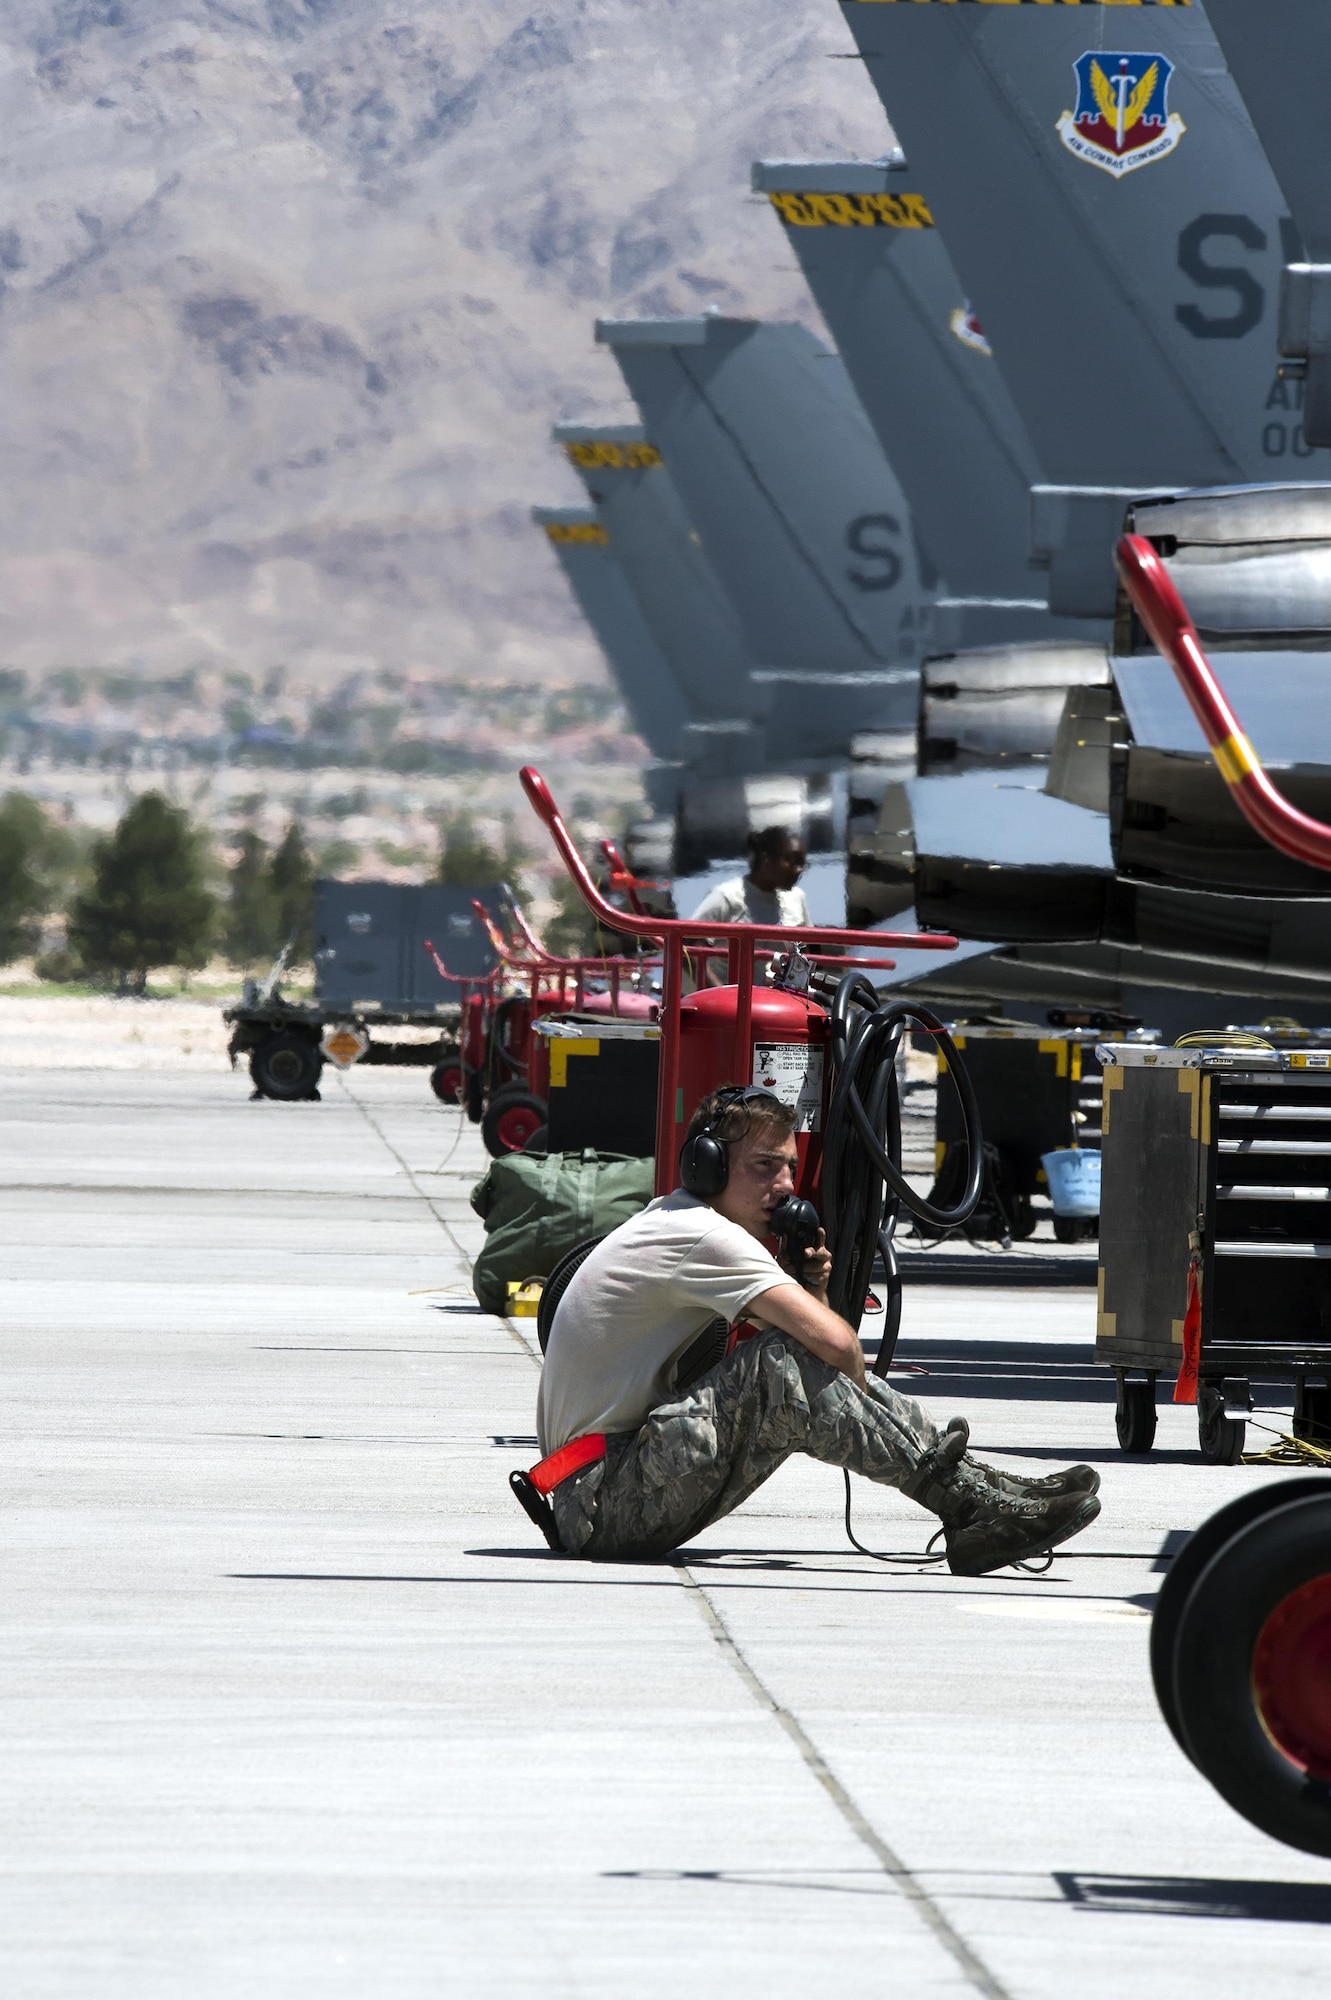 Airman 1st Class Shawn Kelly, 79th Aircraft Maintenance Unit crew chief, prepares an F-16 Fighting Falcon for a flight mission during Red Flag 16-3 at Nellis Air Force Base, Nevada, Monday, July 11, 2016. Although the exercise will test all participating units, 16-3 will provide a deeper understanding on space and cyber systems capabilities and how they contribute to the multi-domain aspect of the operation. (U.S. Air Force photo/Tech. Sgt. Julius Delos Reyes)